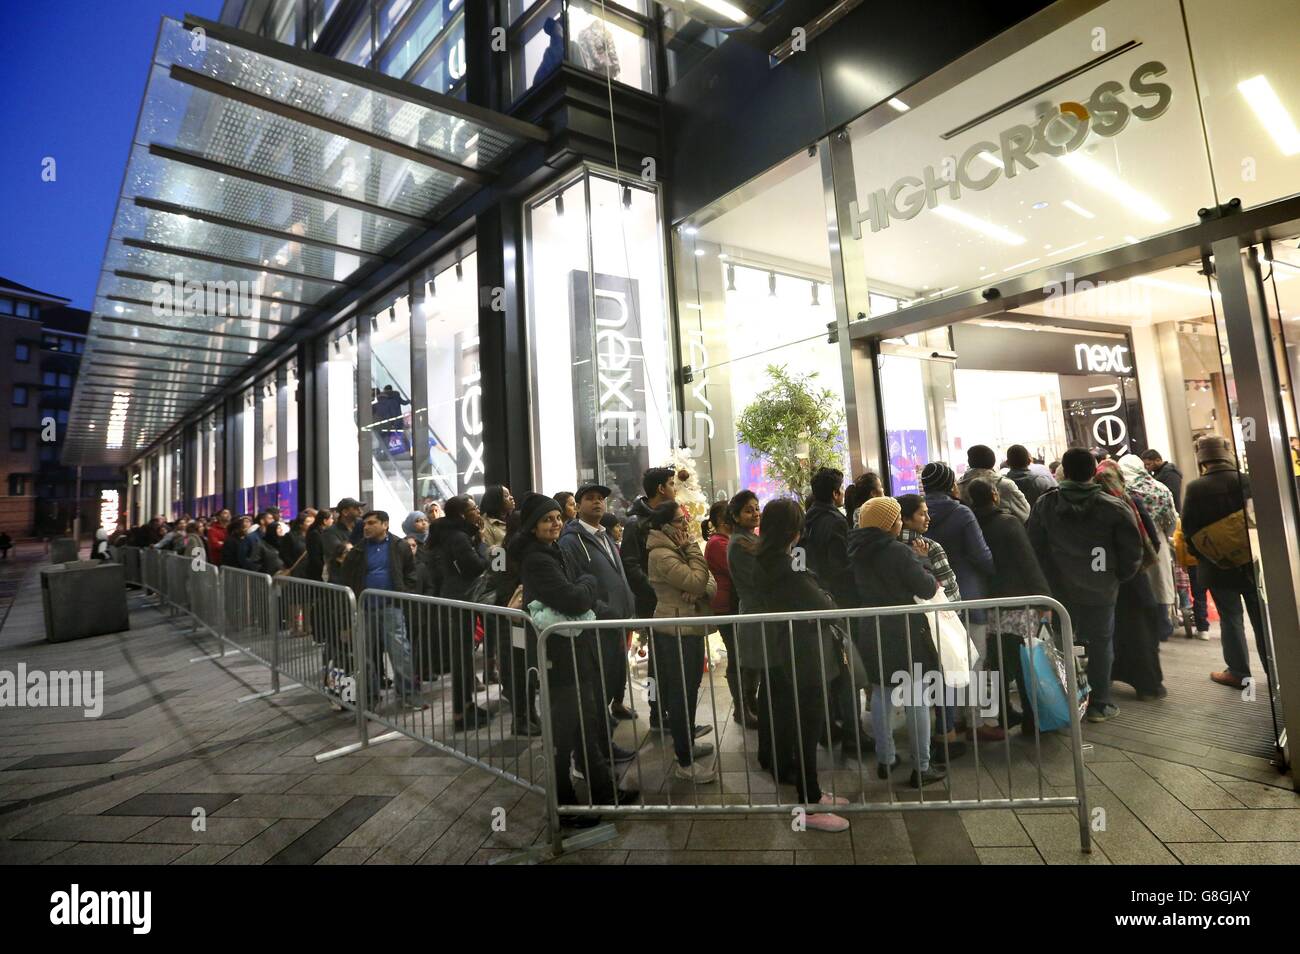 EDITORIAL USE ONLY Shoppers queue to enter a store at&Ecirc;Highcross shopping centre in Leicester during the Boxing Day sales. Stock Photo